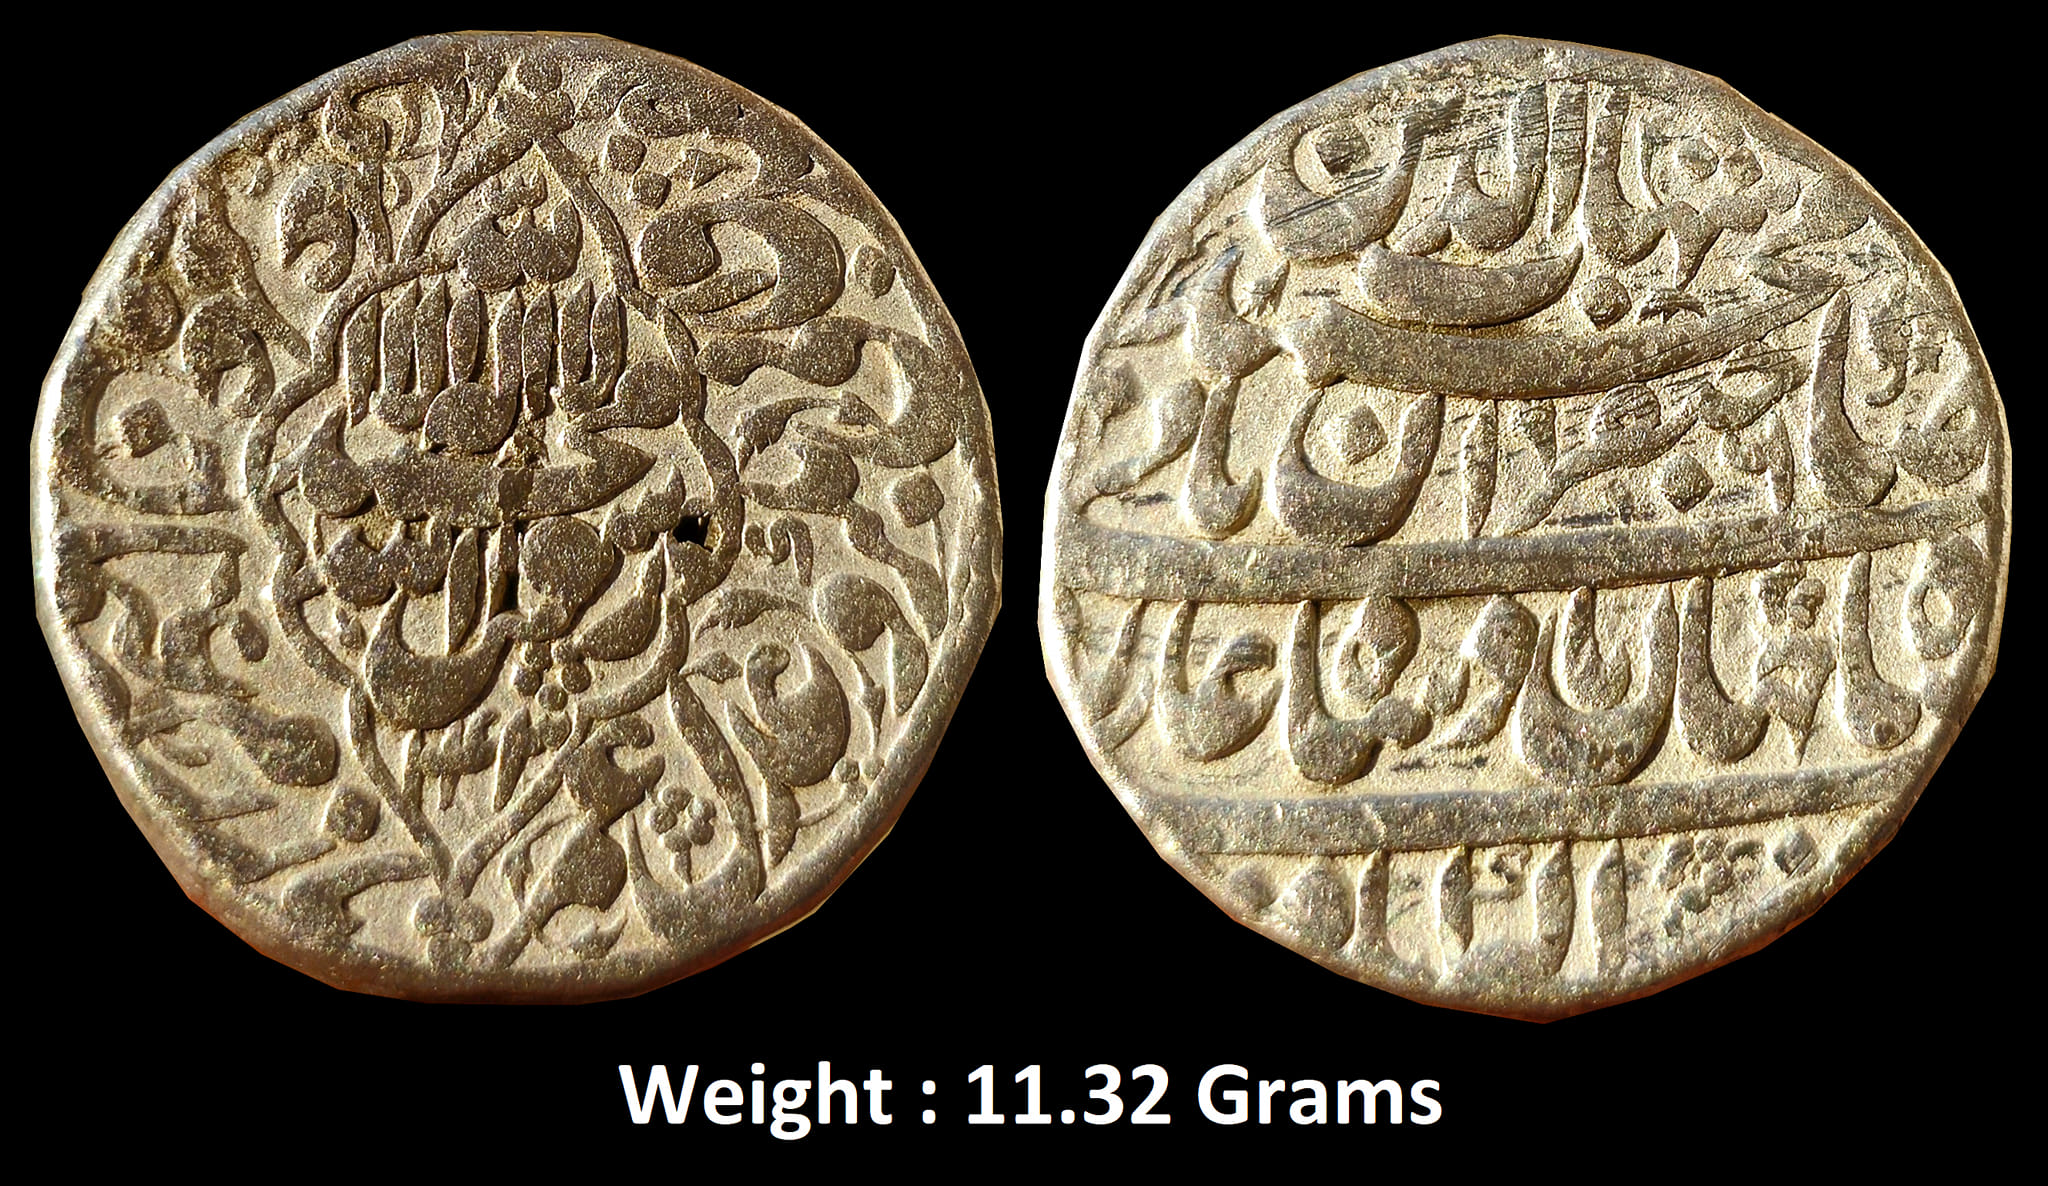 Mughal ; Shah Jahan ; Rare Ornamental Silver Rupee ; Mint : Akbarabad; 1043 AH / RY 6
Sahib Qiran Type ; Complete Die Specimen
Note : Centrally Struck ,Full Kalima and date in Mehrab Design with full details .